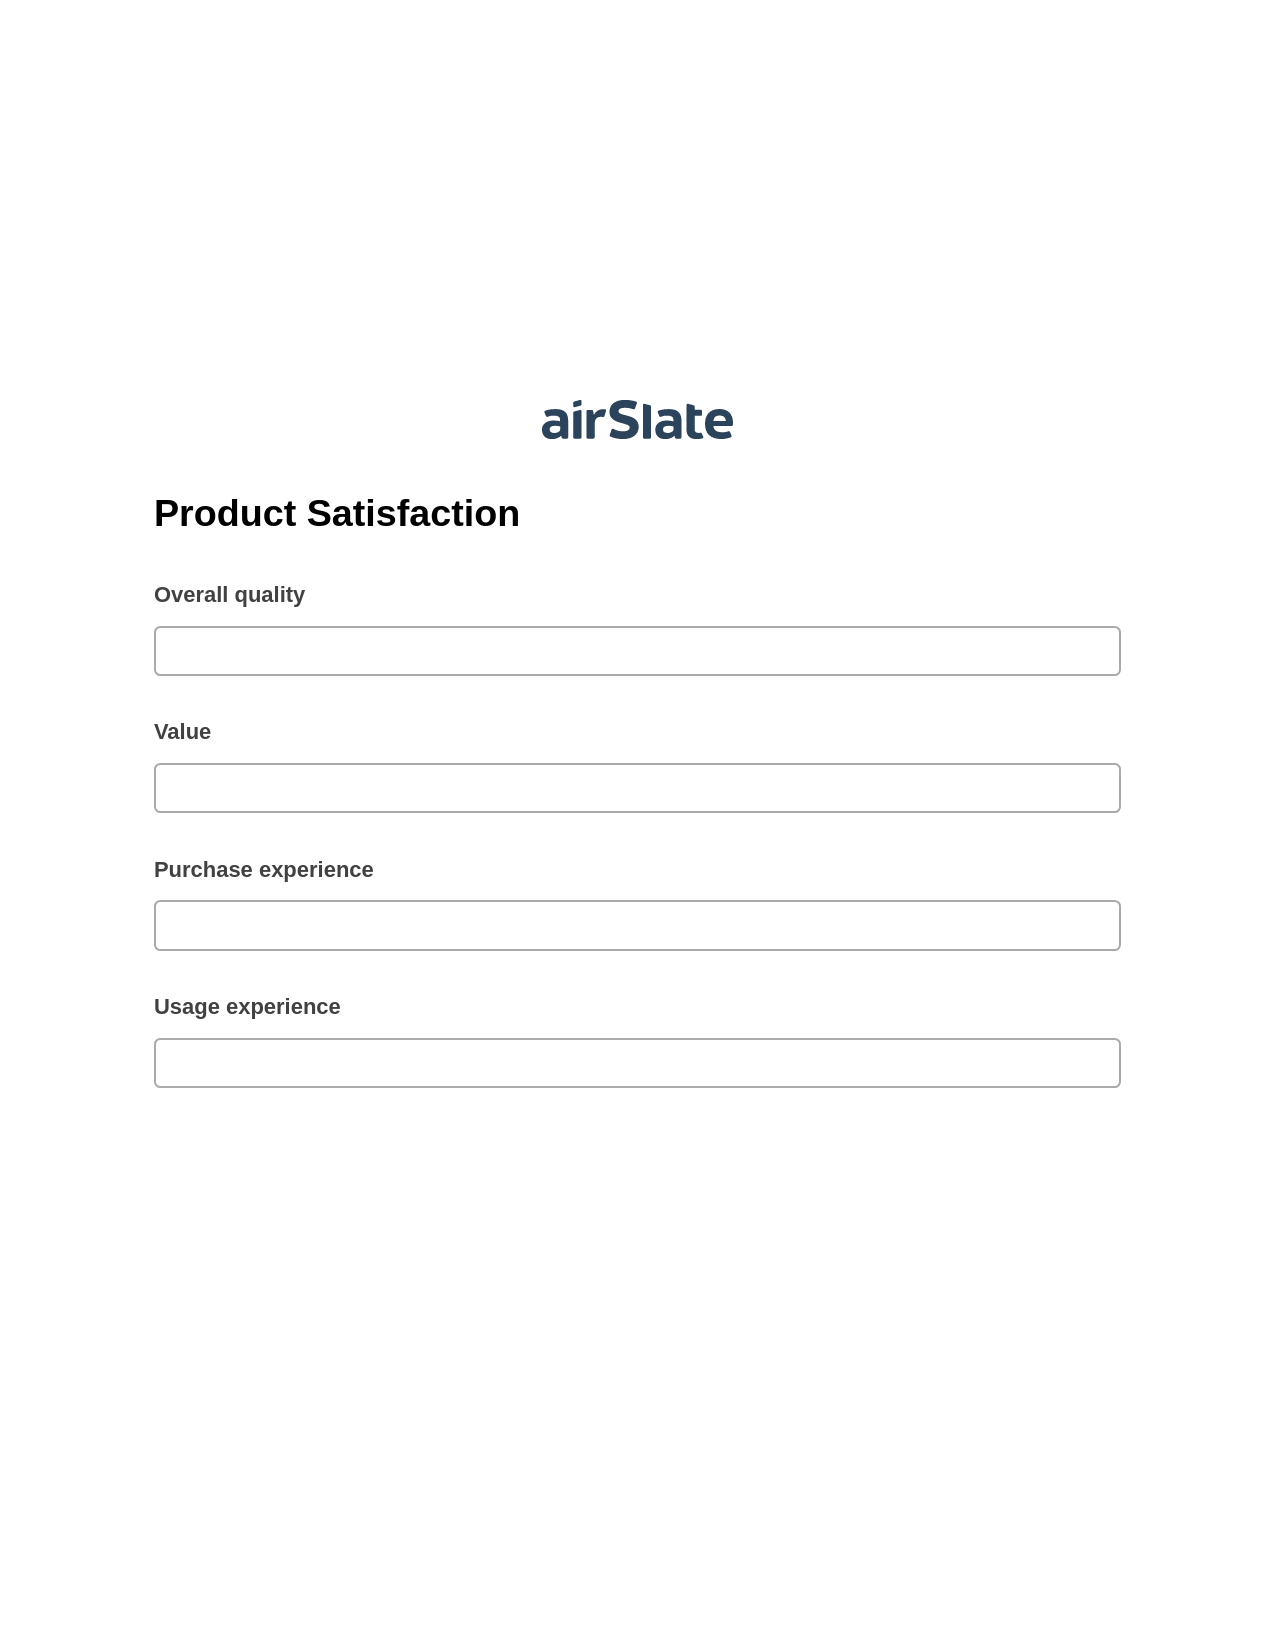 Product Satisfaction Pre-fill from CSV File Bot, Create slate bot, Export to Smartsheet